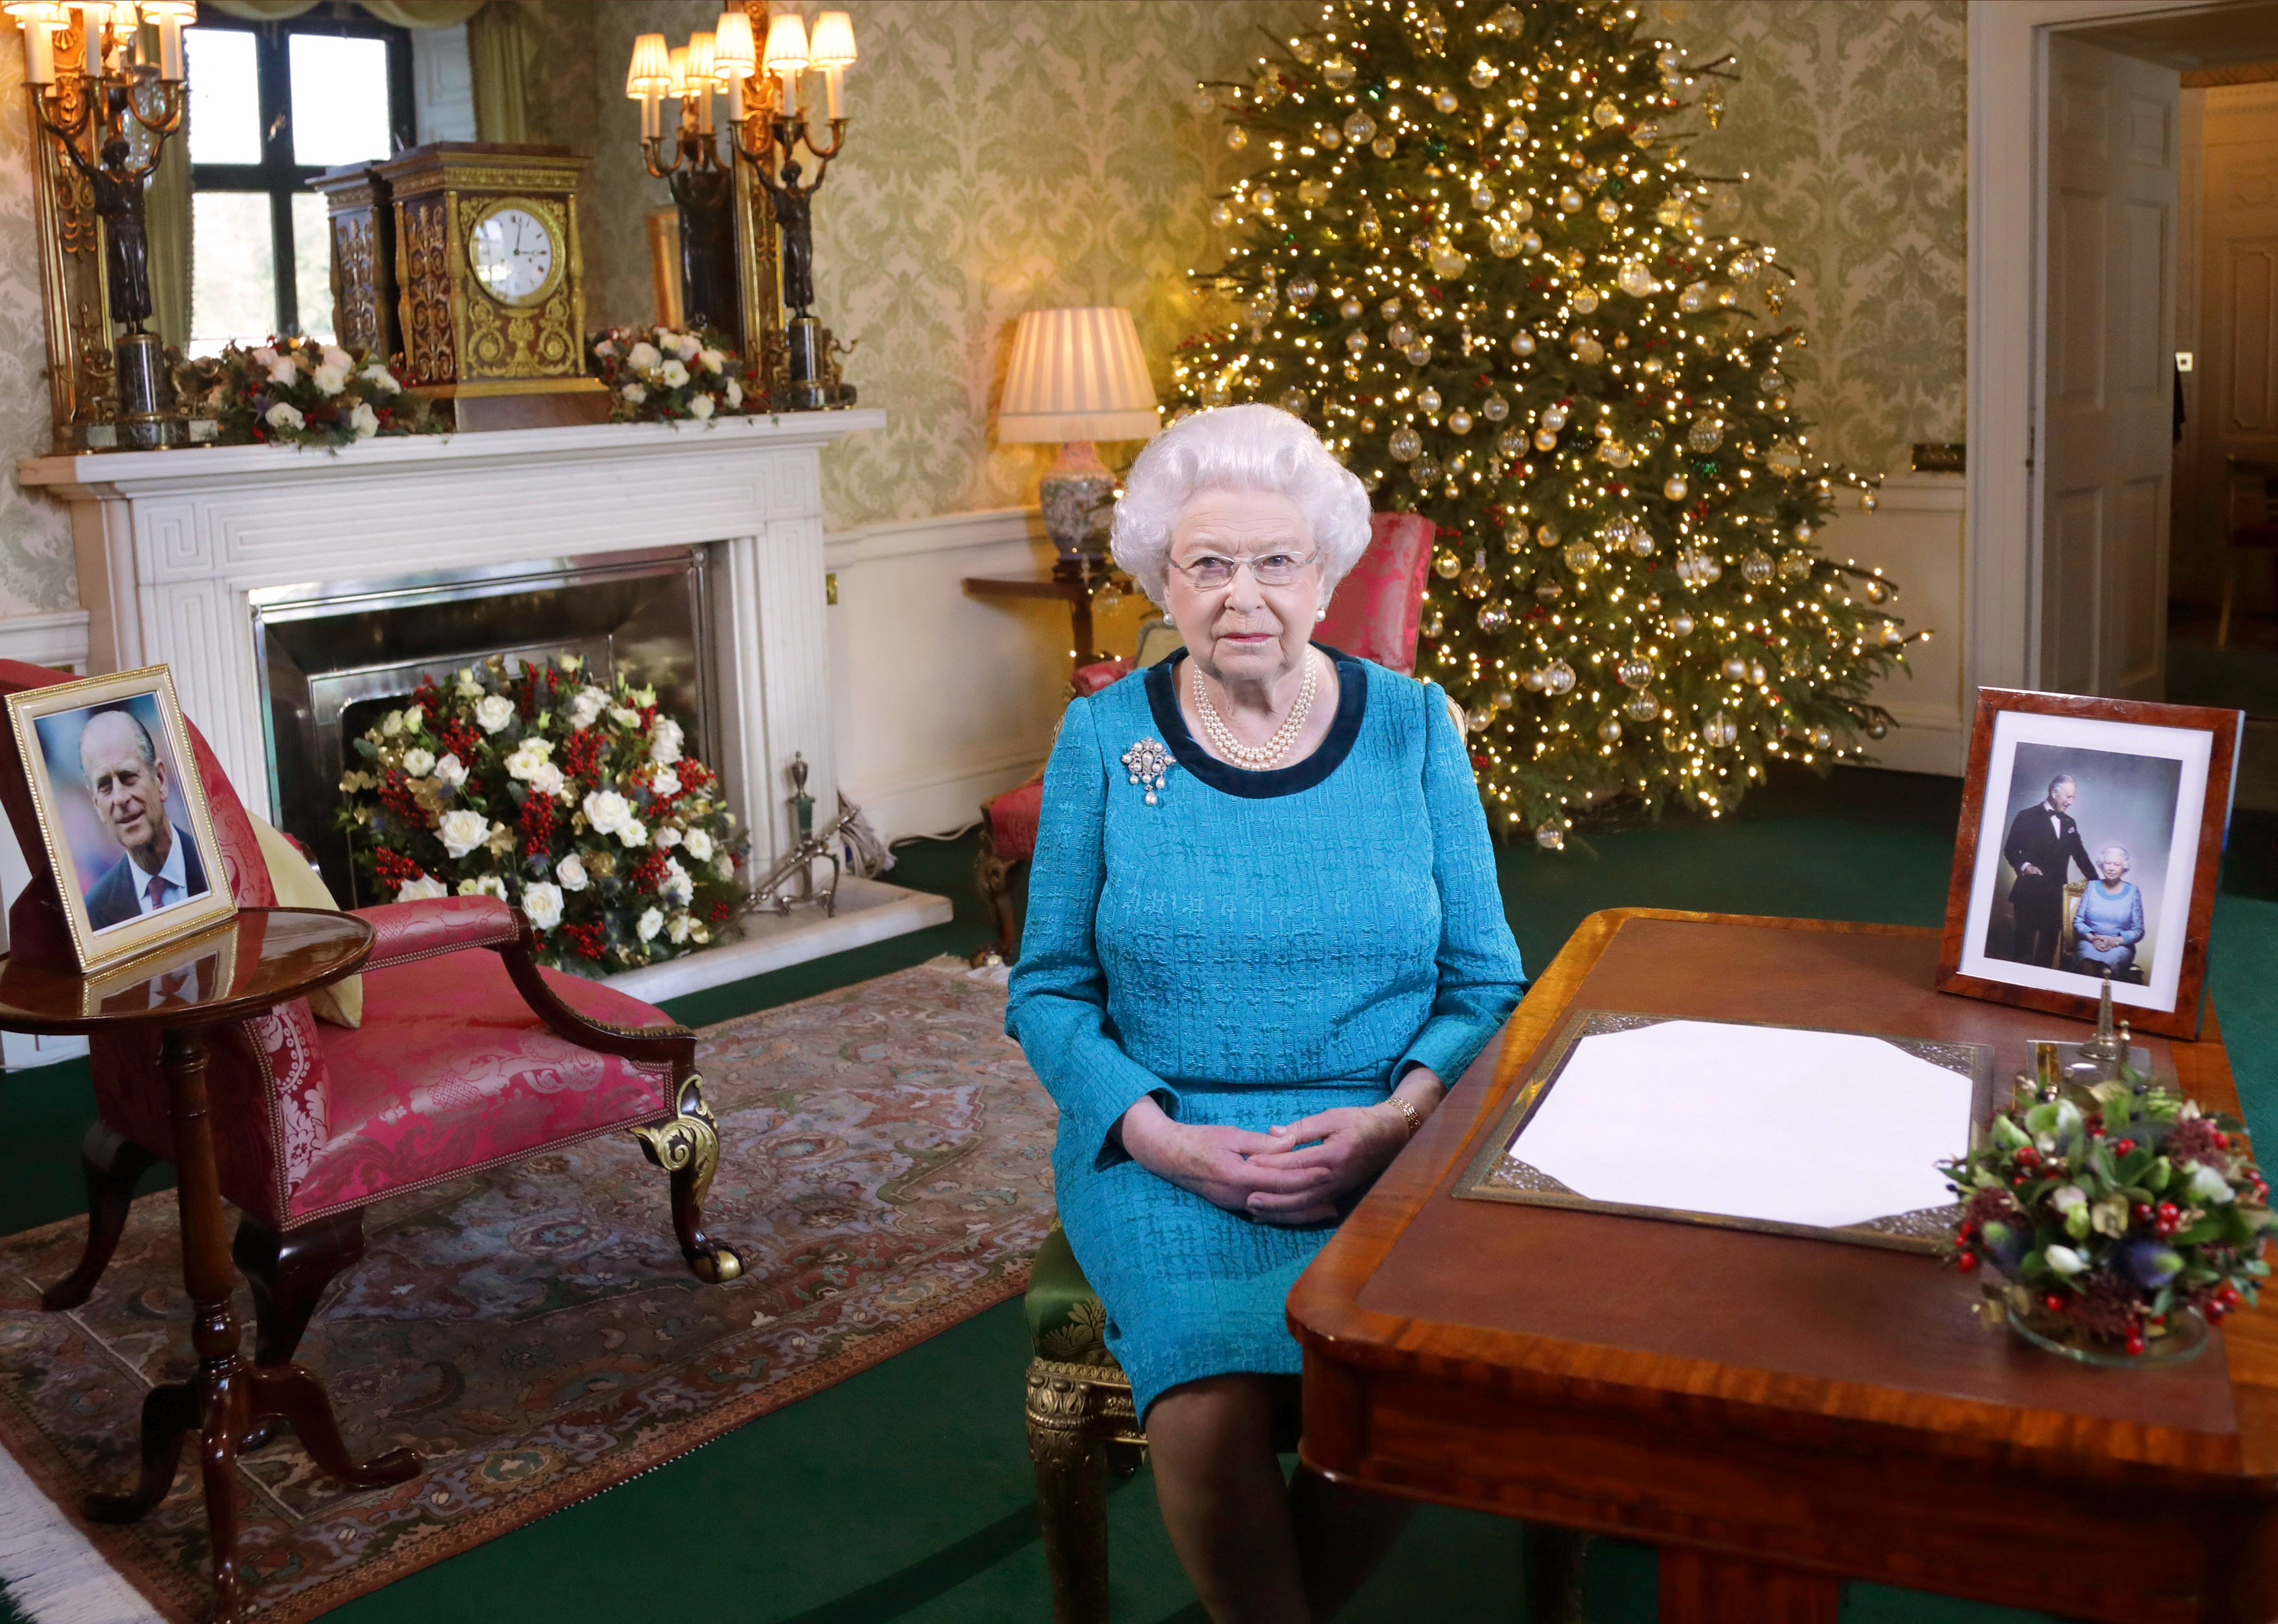 Queen Elizabeth II sits at a desk in the Regency Room after recording her Christmas Day broadcast to the Commonwealth at Buckingham Palace on December 24, 2016 in London, England. (Yui Mok&mdash;WPA Pool/Getty Images)